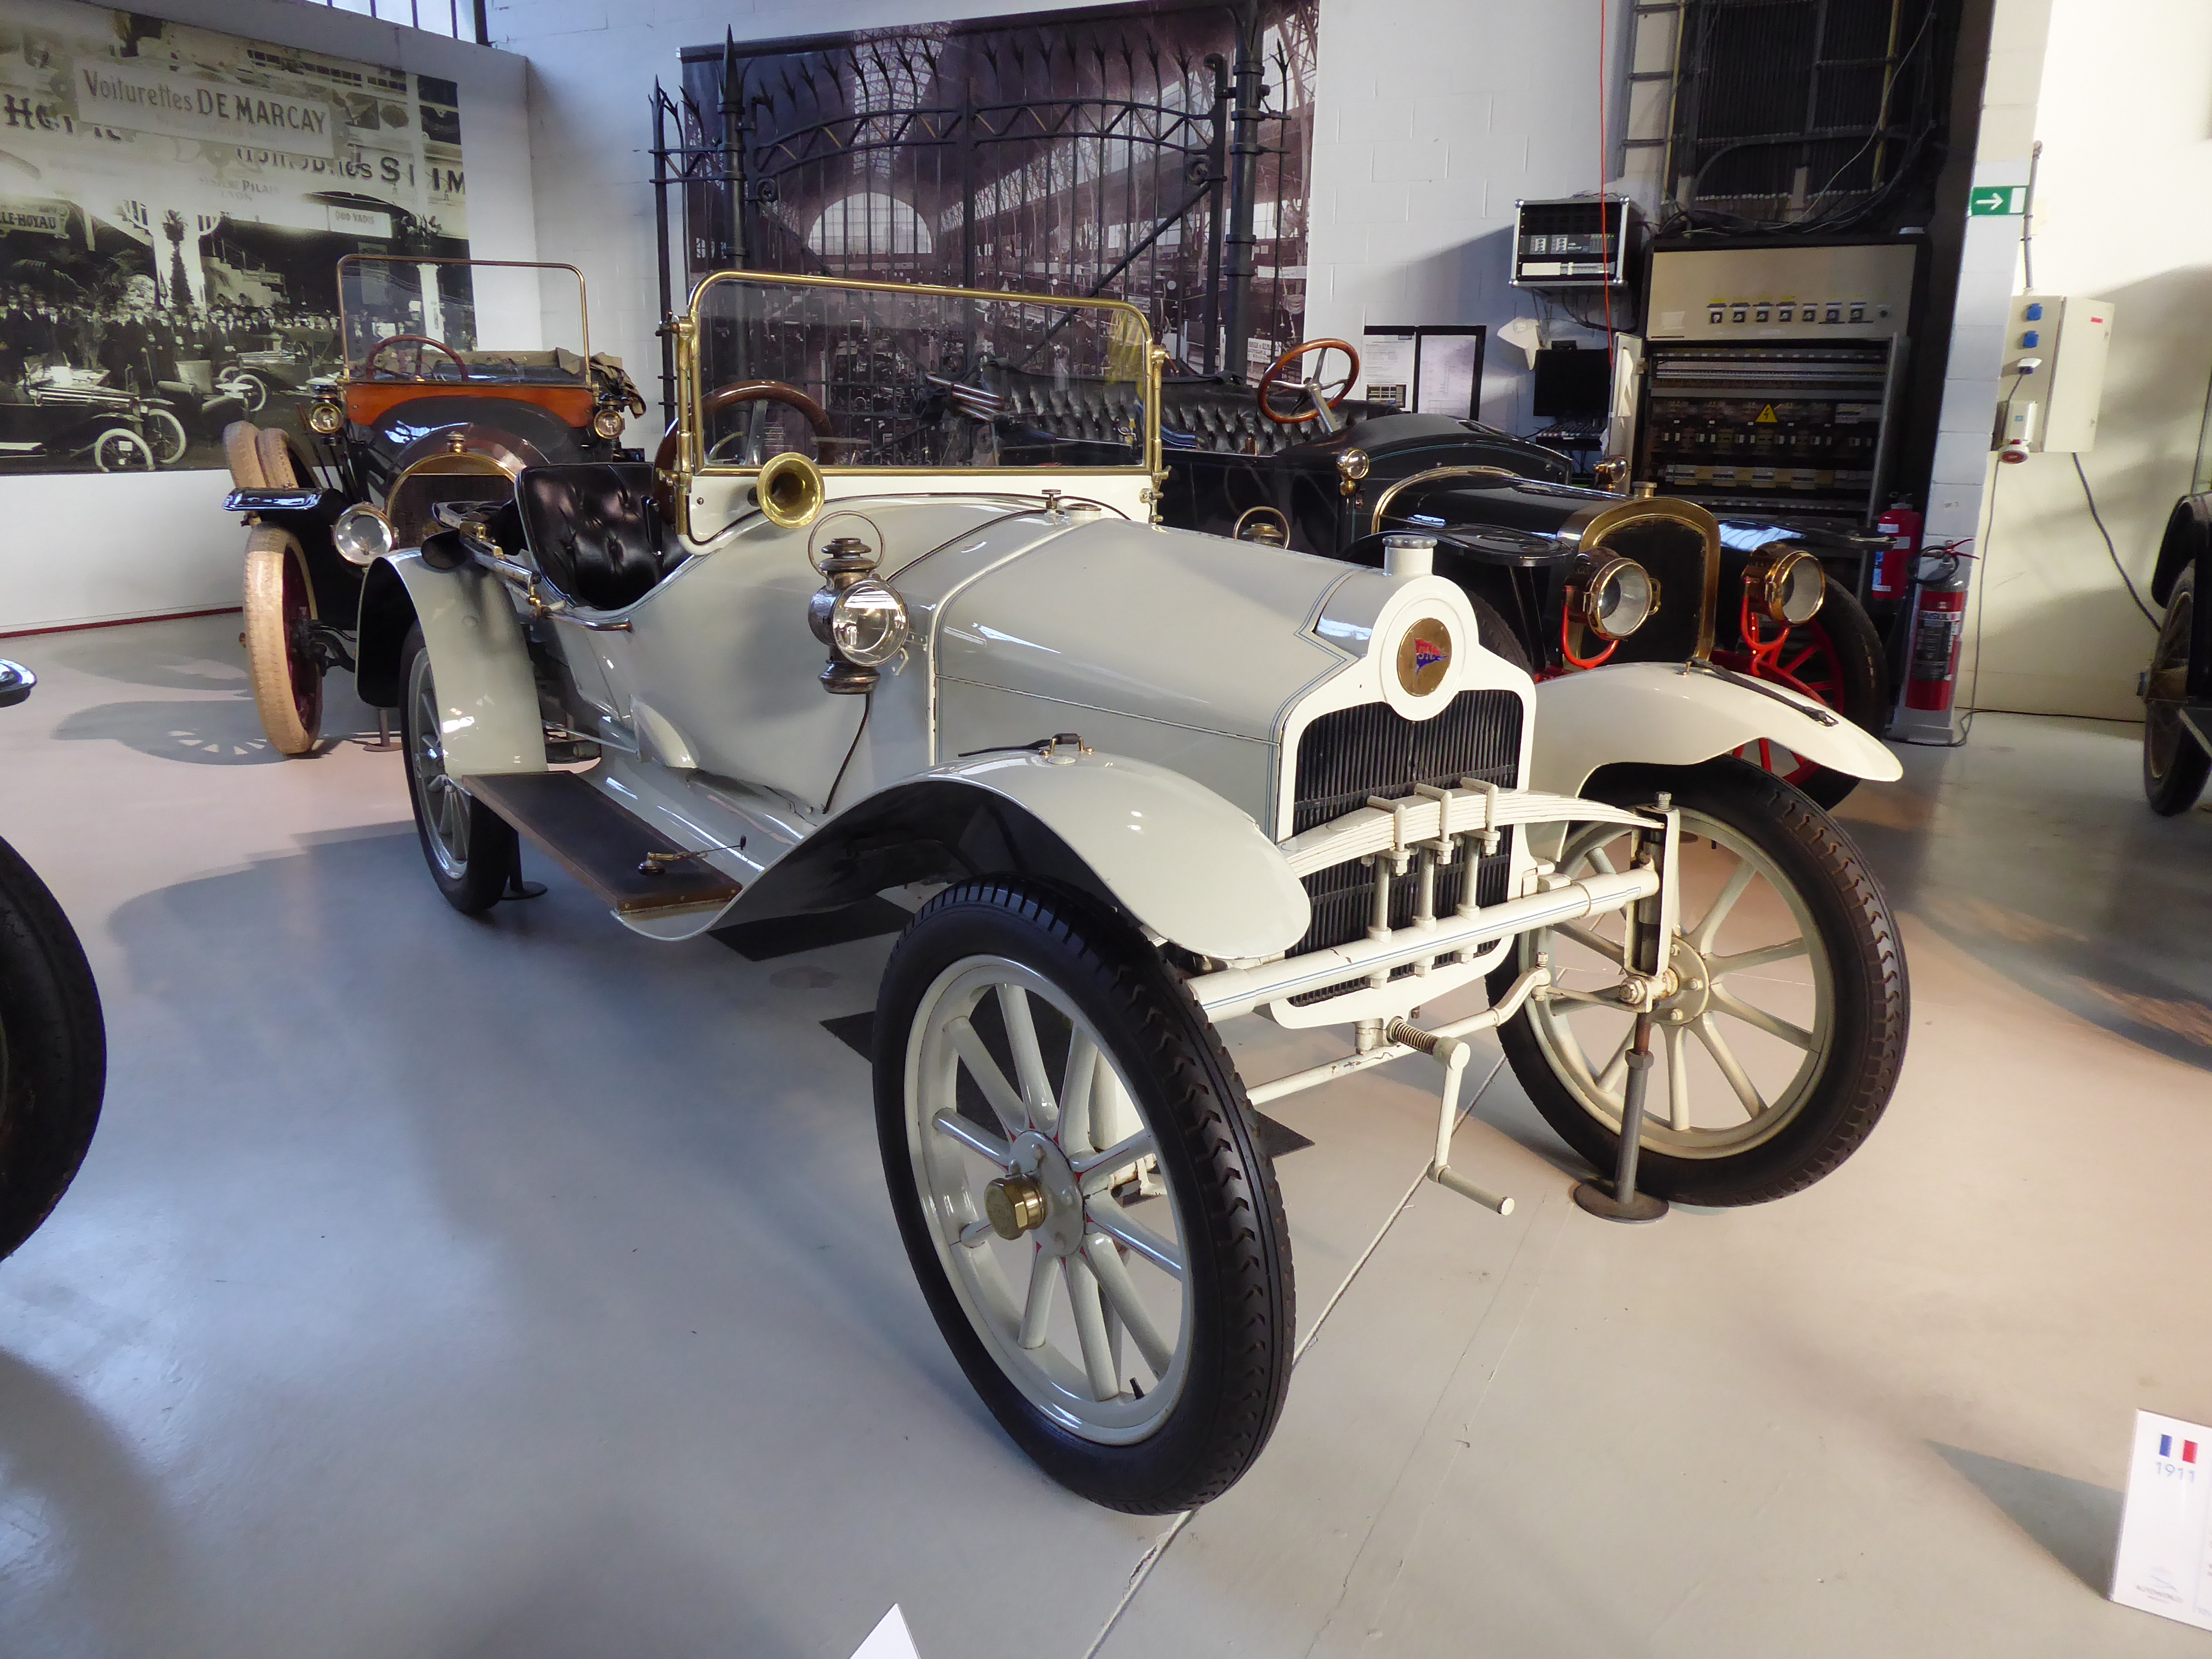 Sizaire-Naudin Two-seater de 1911